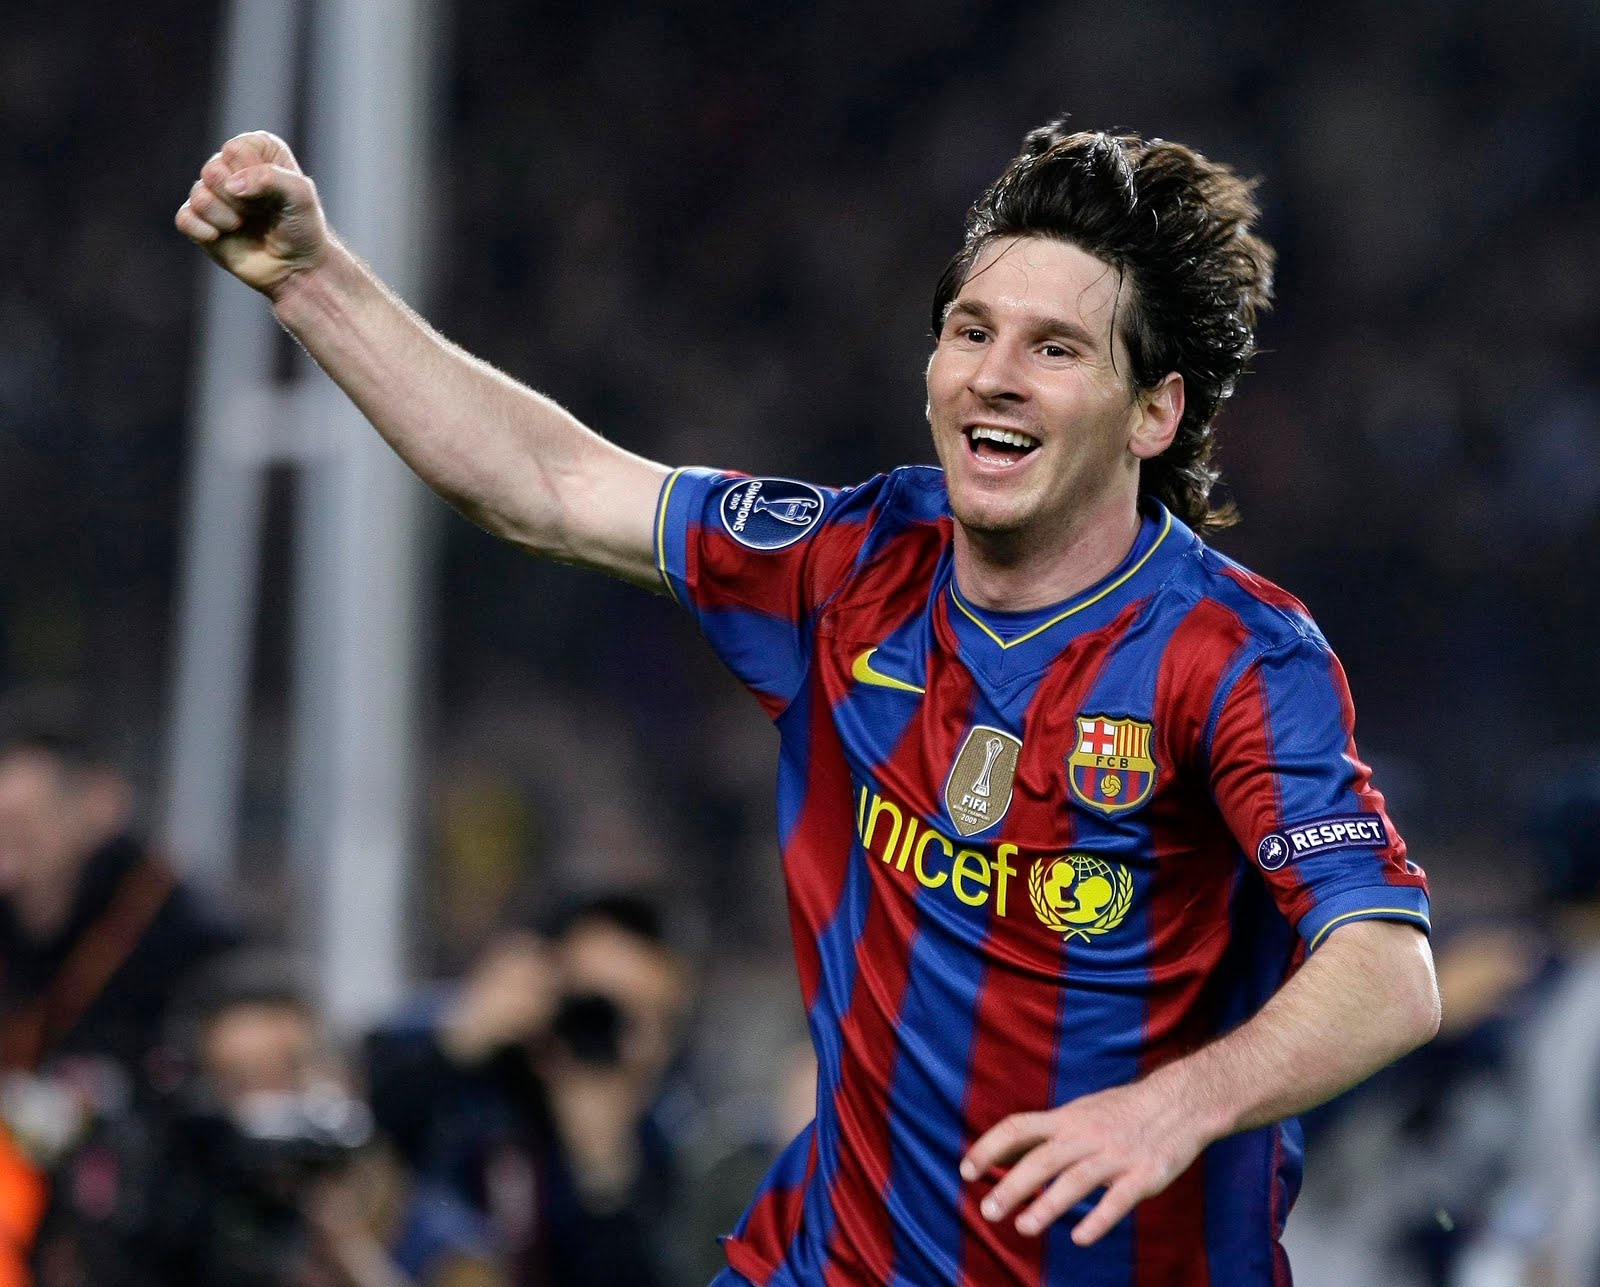  Players Lionel Messi Wallpapers HD   Messi Latest Wallpapers 2012